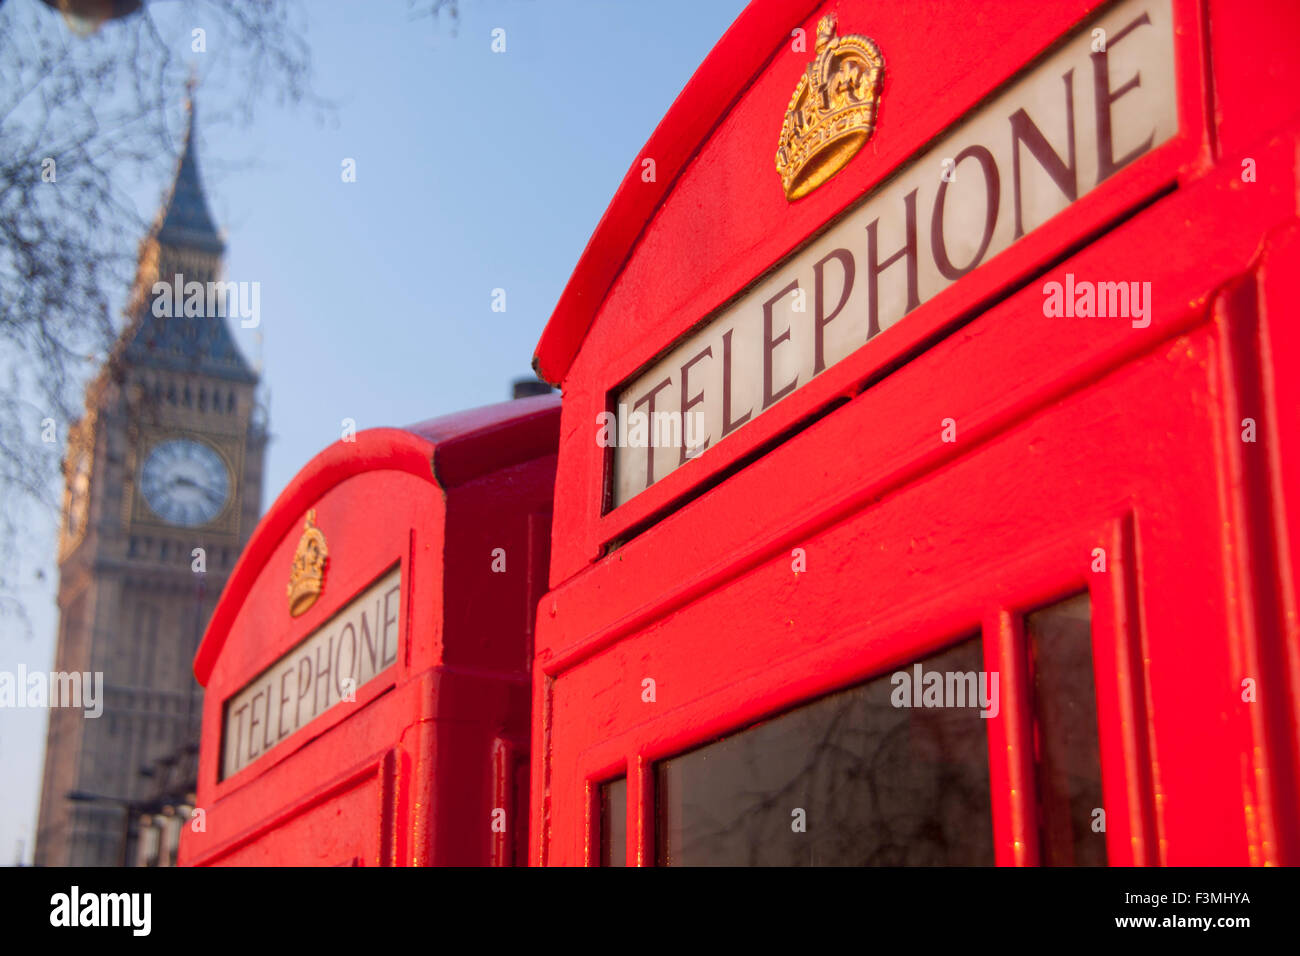 Big Ben Elizabeth Tower Clock Tower of Houses of Parliament with two traditional red K6 telephone  phone boxes in foreground Vic Stock Photo